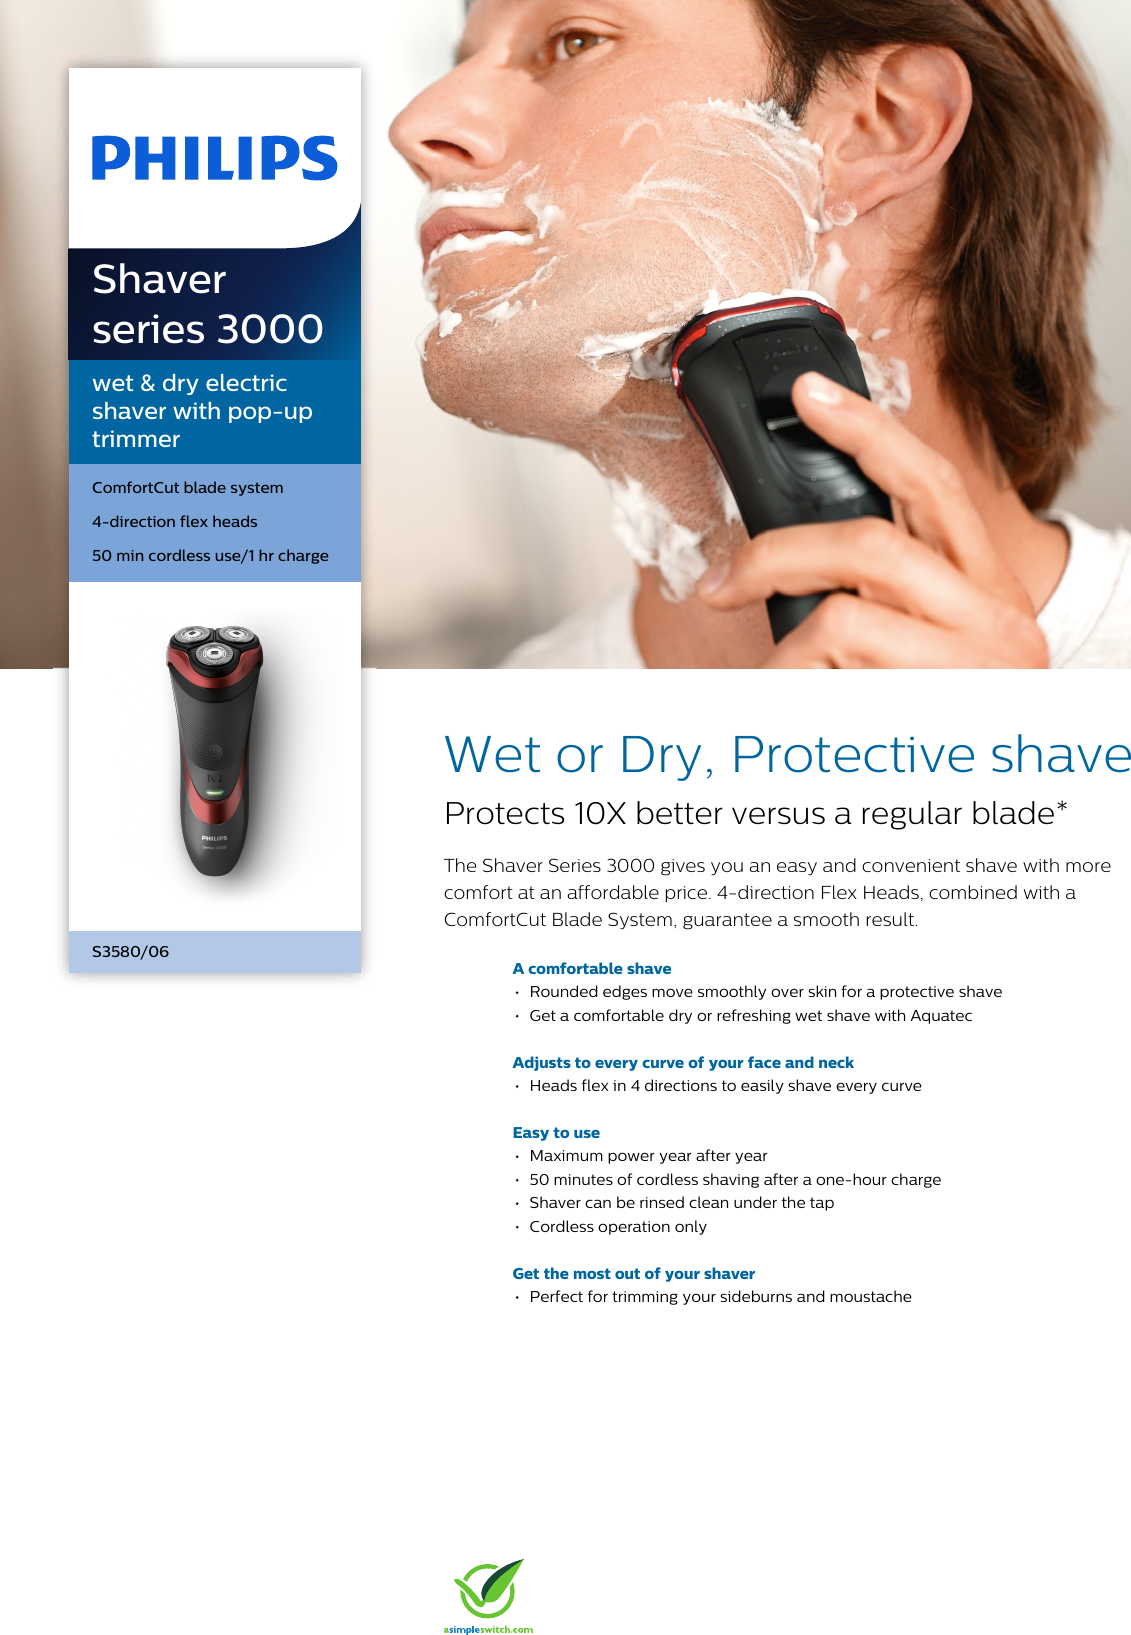 Page 1 of 3 - Philips S3580/06 Wet & Dry Electric Shaver With Pop-up Trimmer User Manual Leaflet S3580 06 Pss Enggb